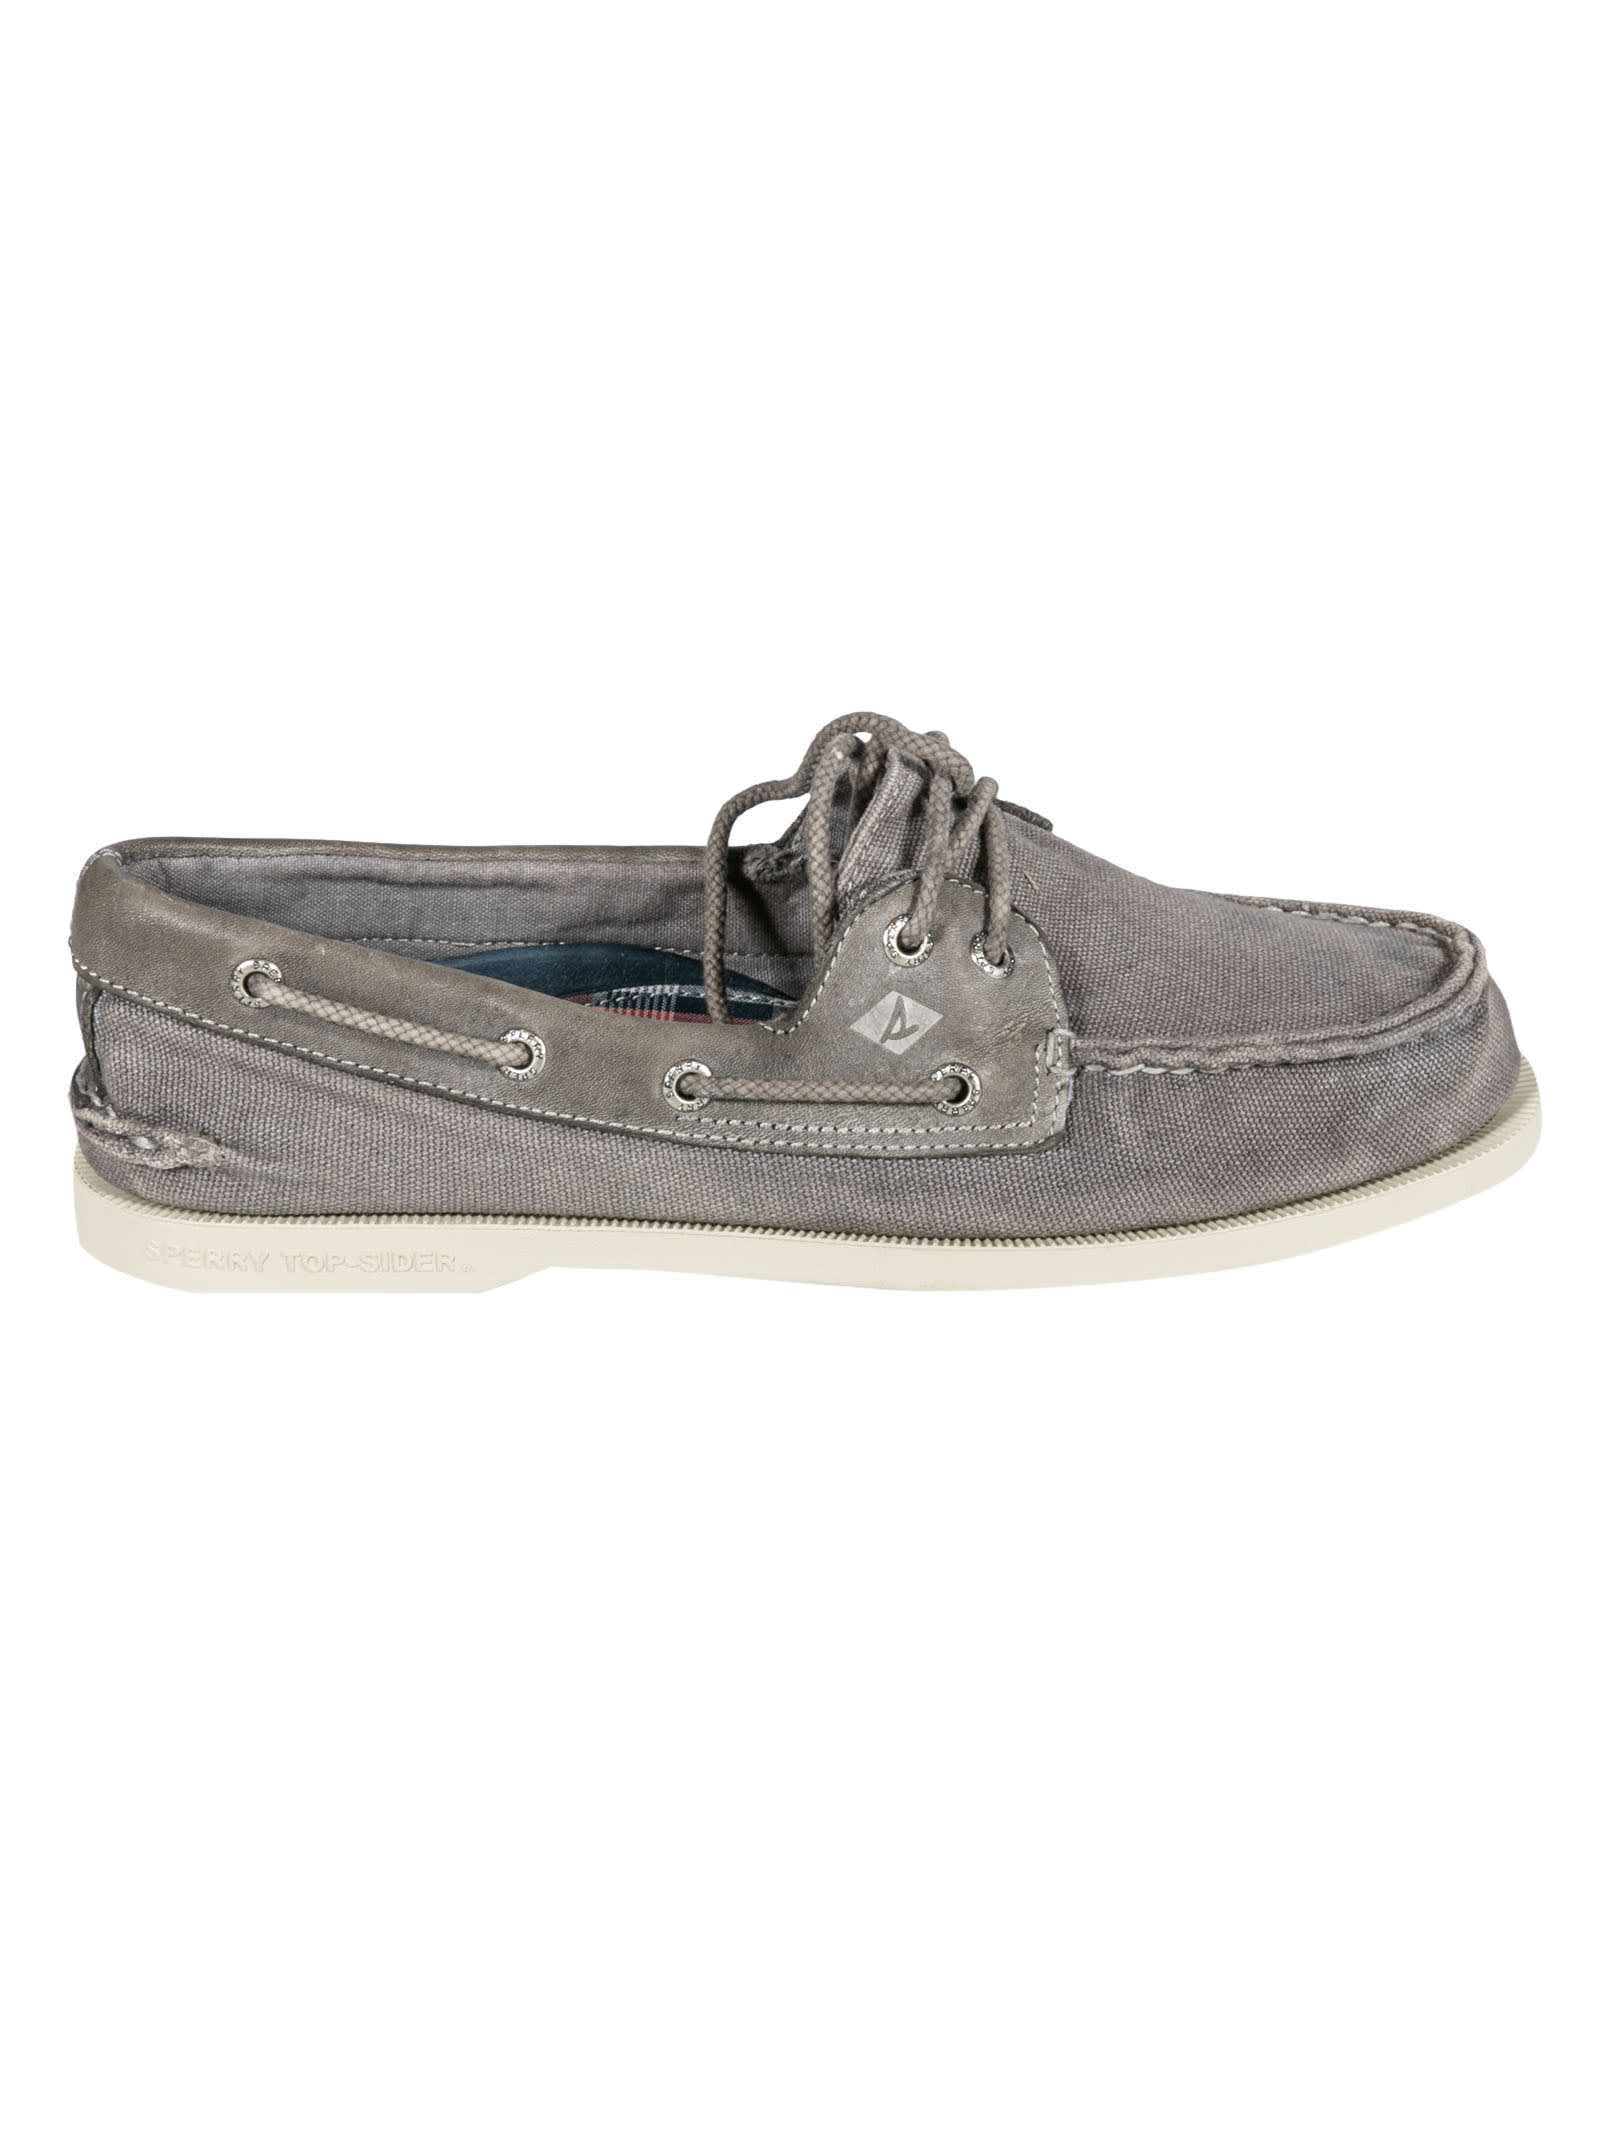 SPERRY LOGO DETAIL LOAFERS,STS21704-GREY